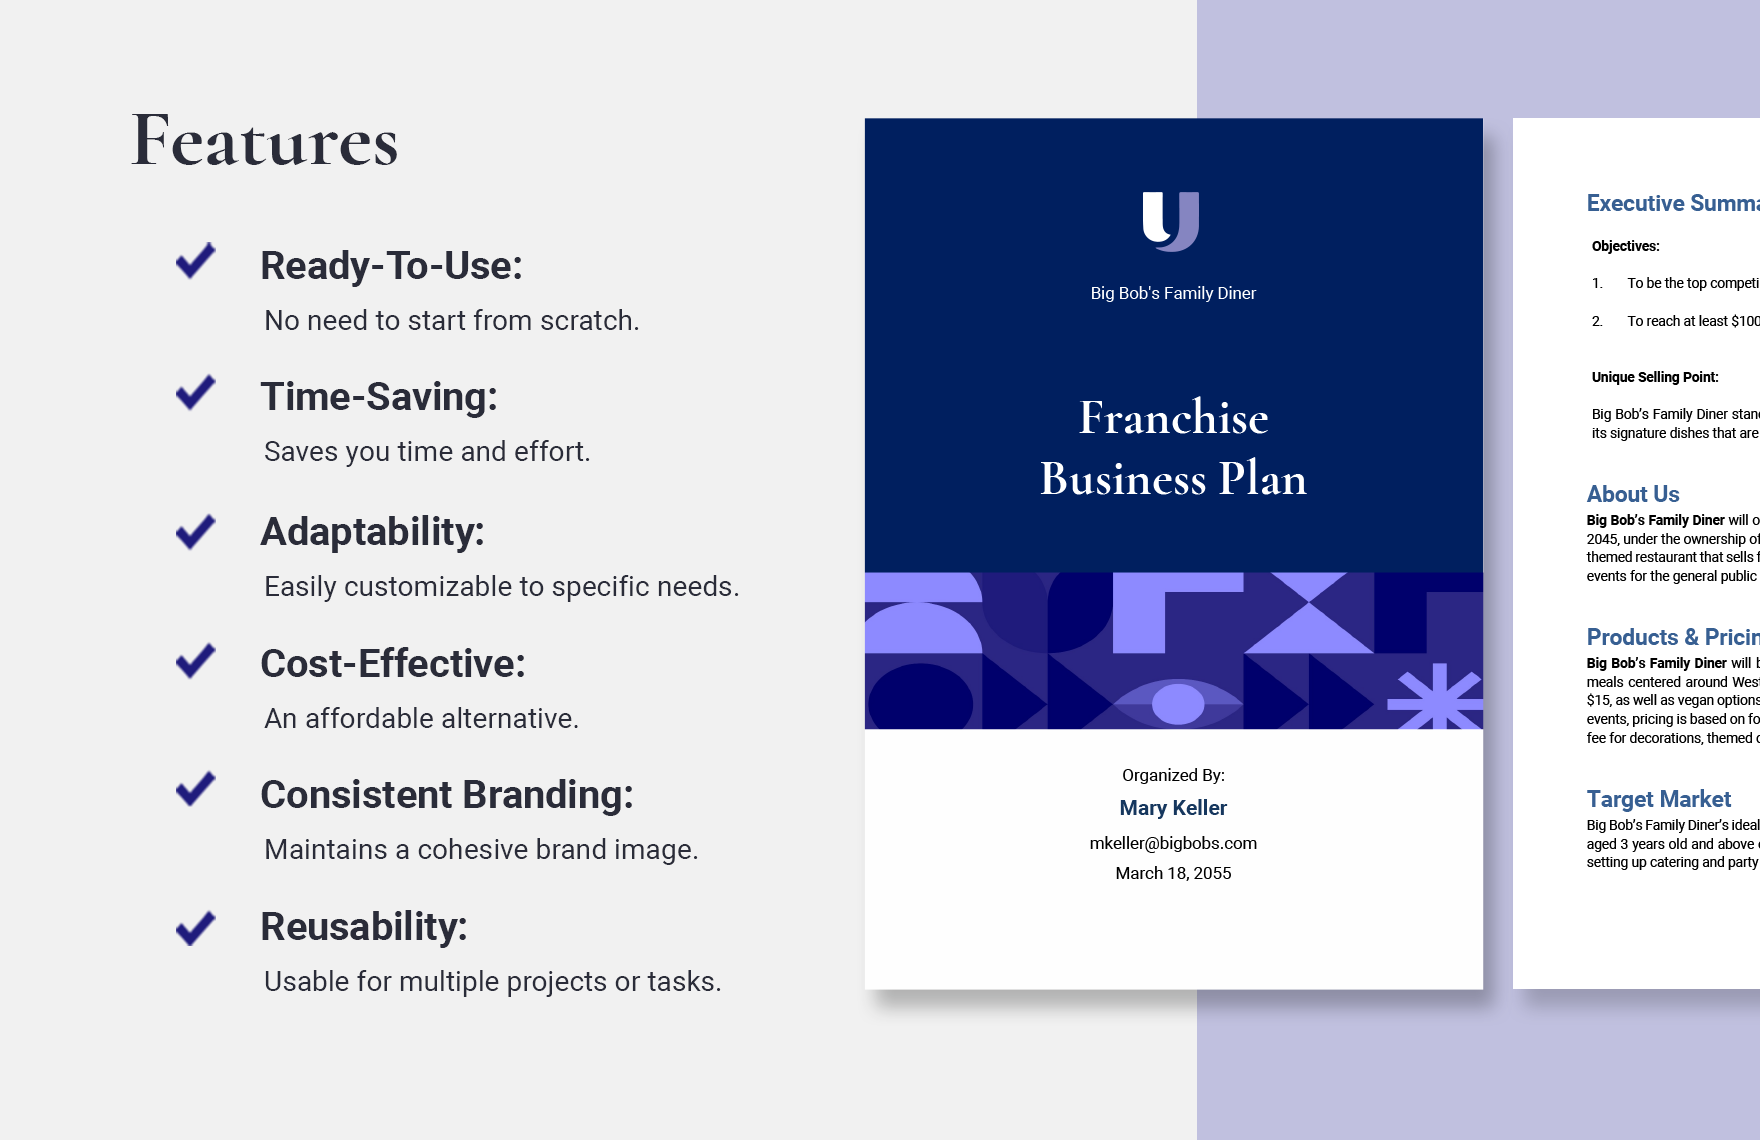 Franchise Business Plan Template